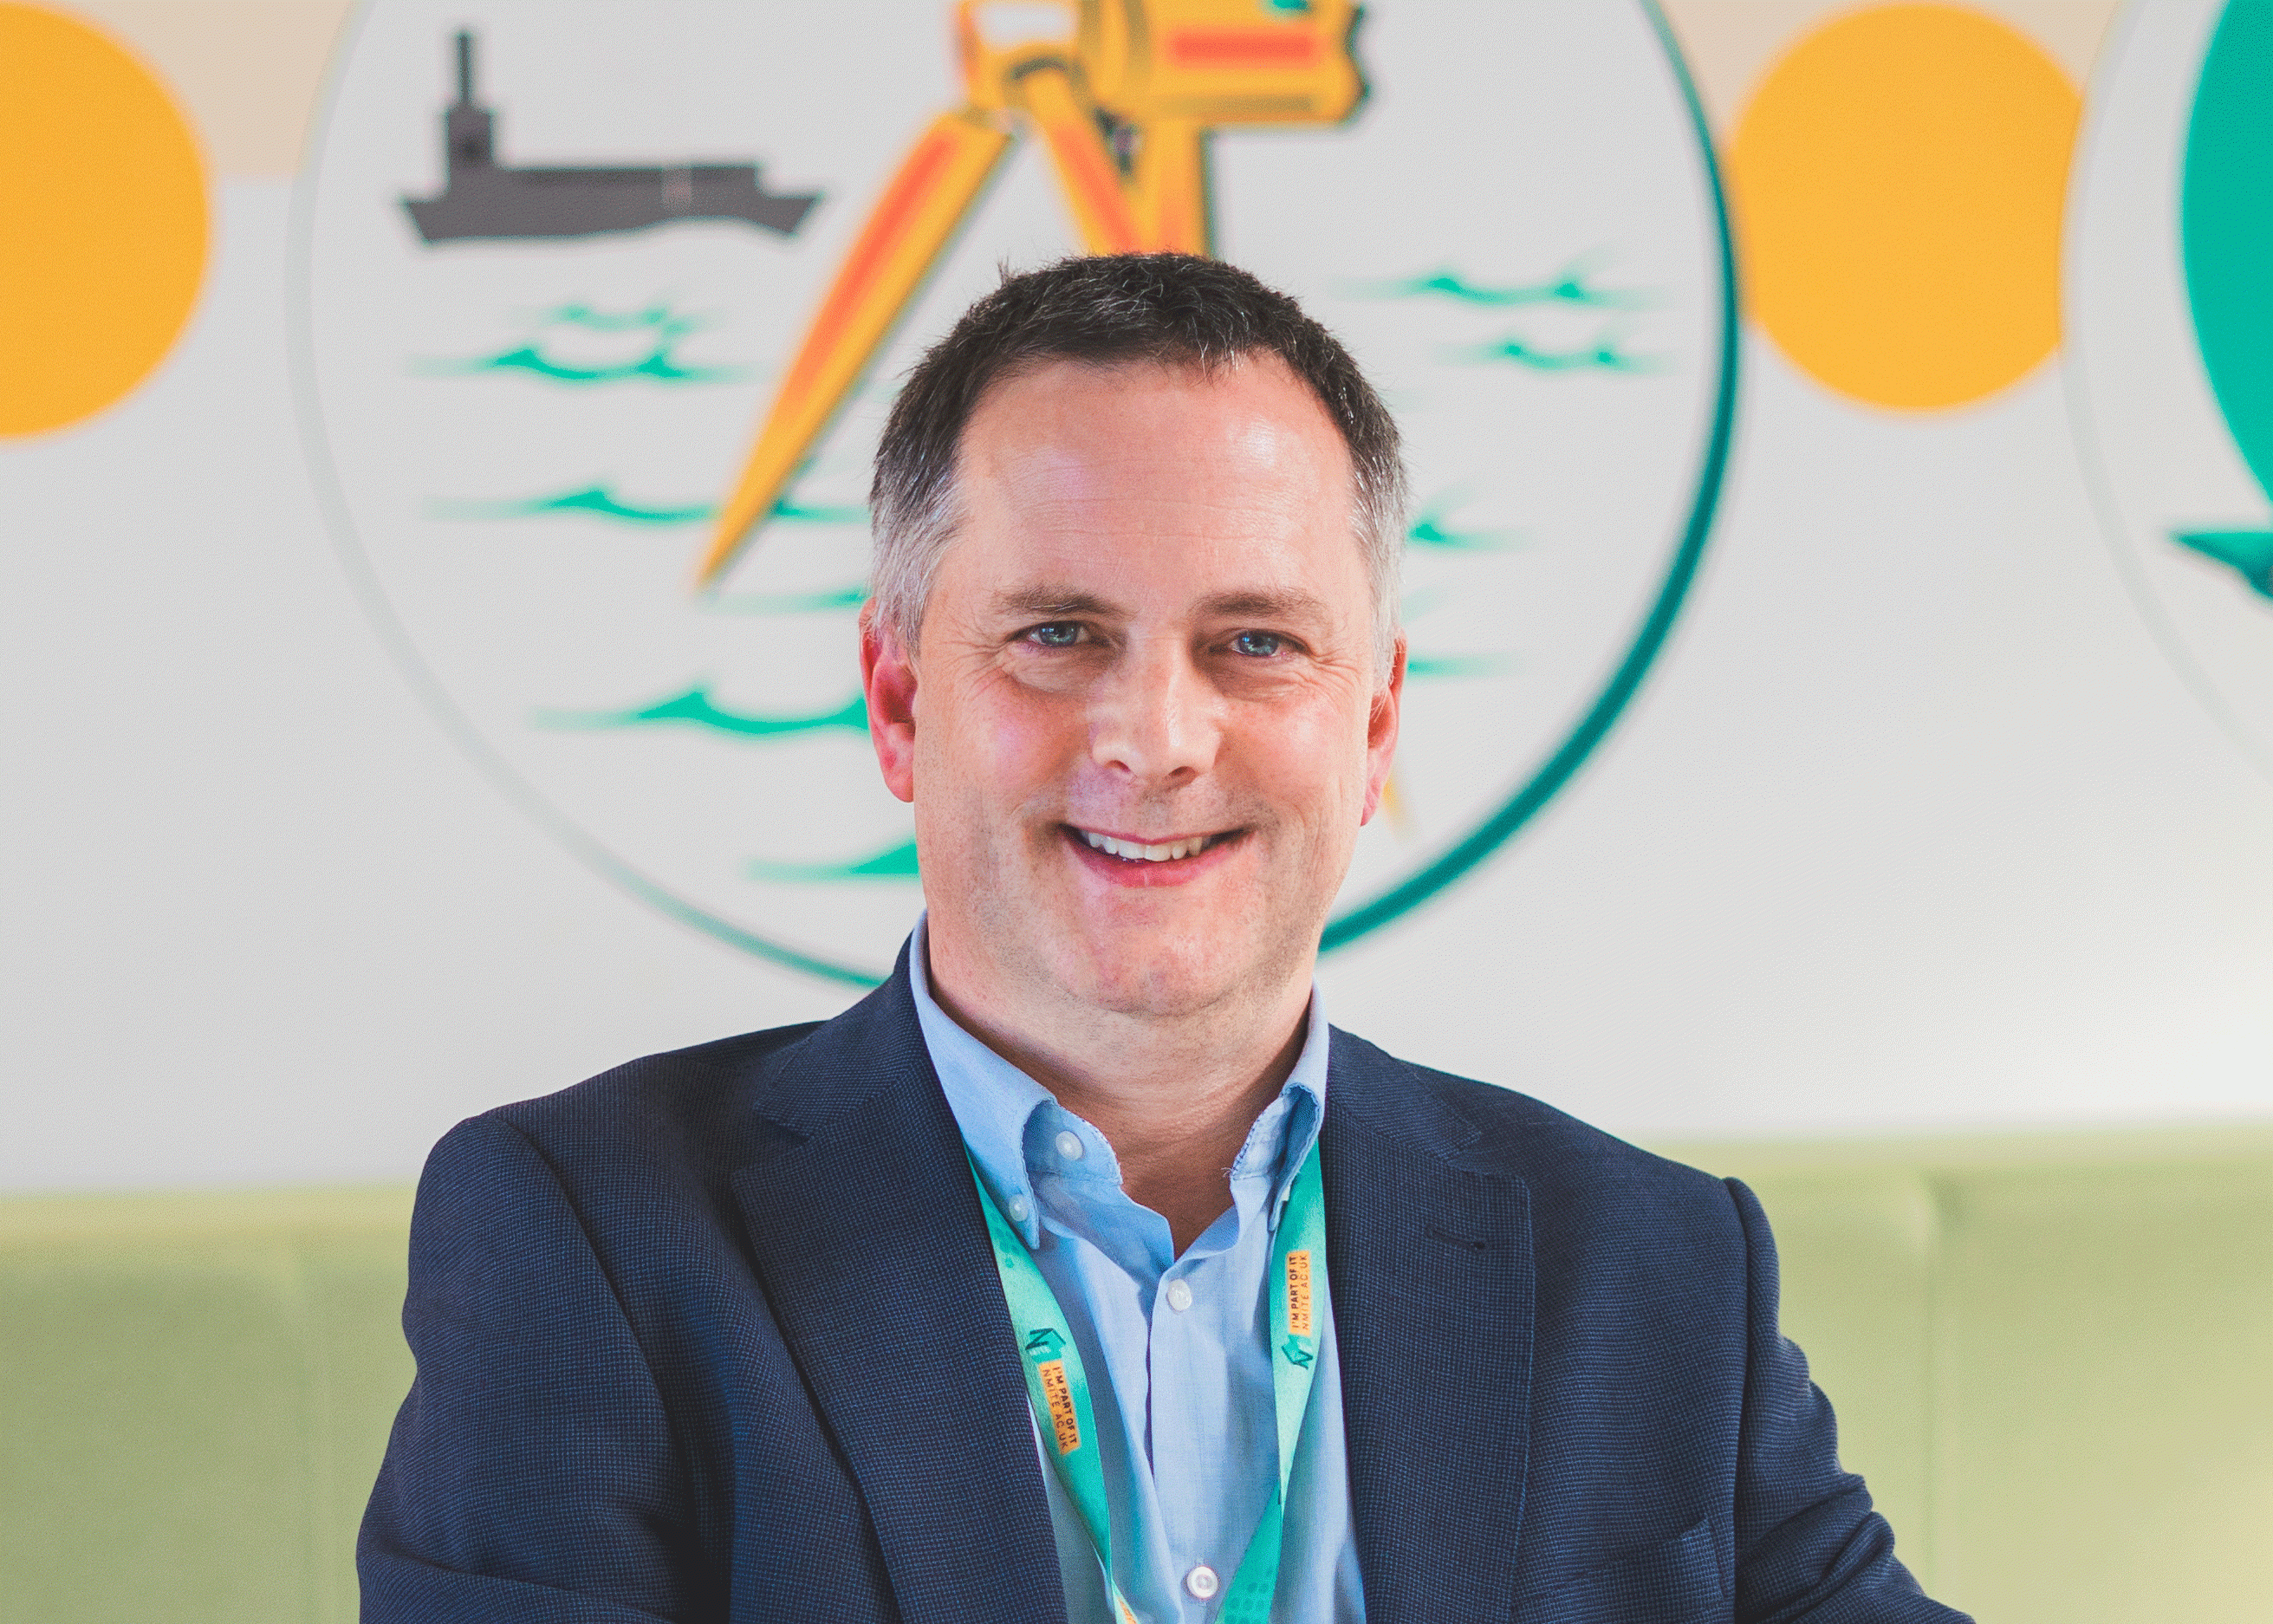 James Newby, Chief Executive of NMITE